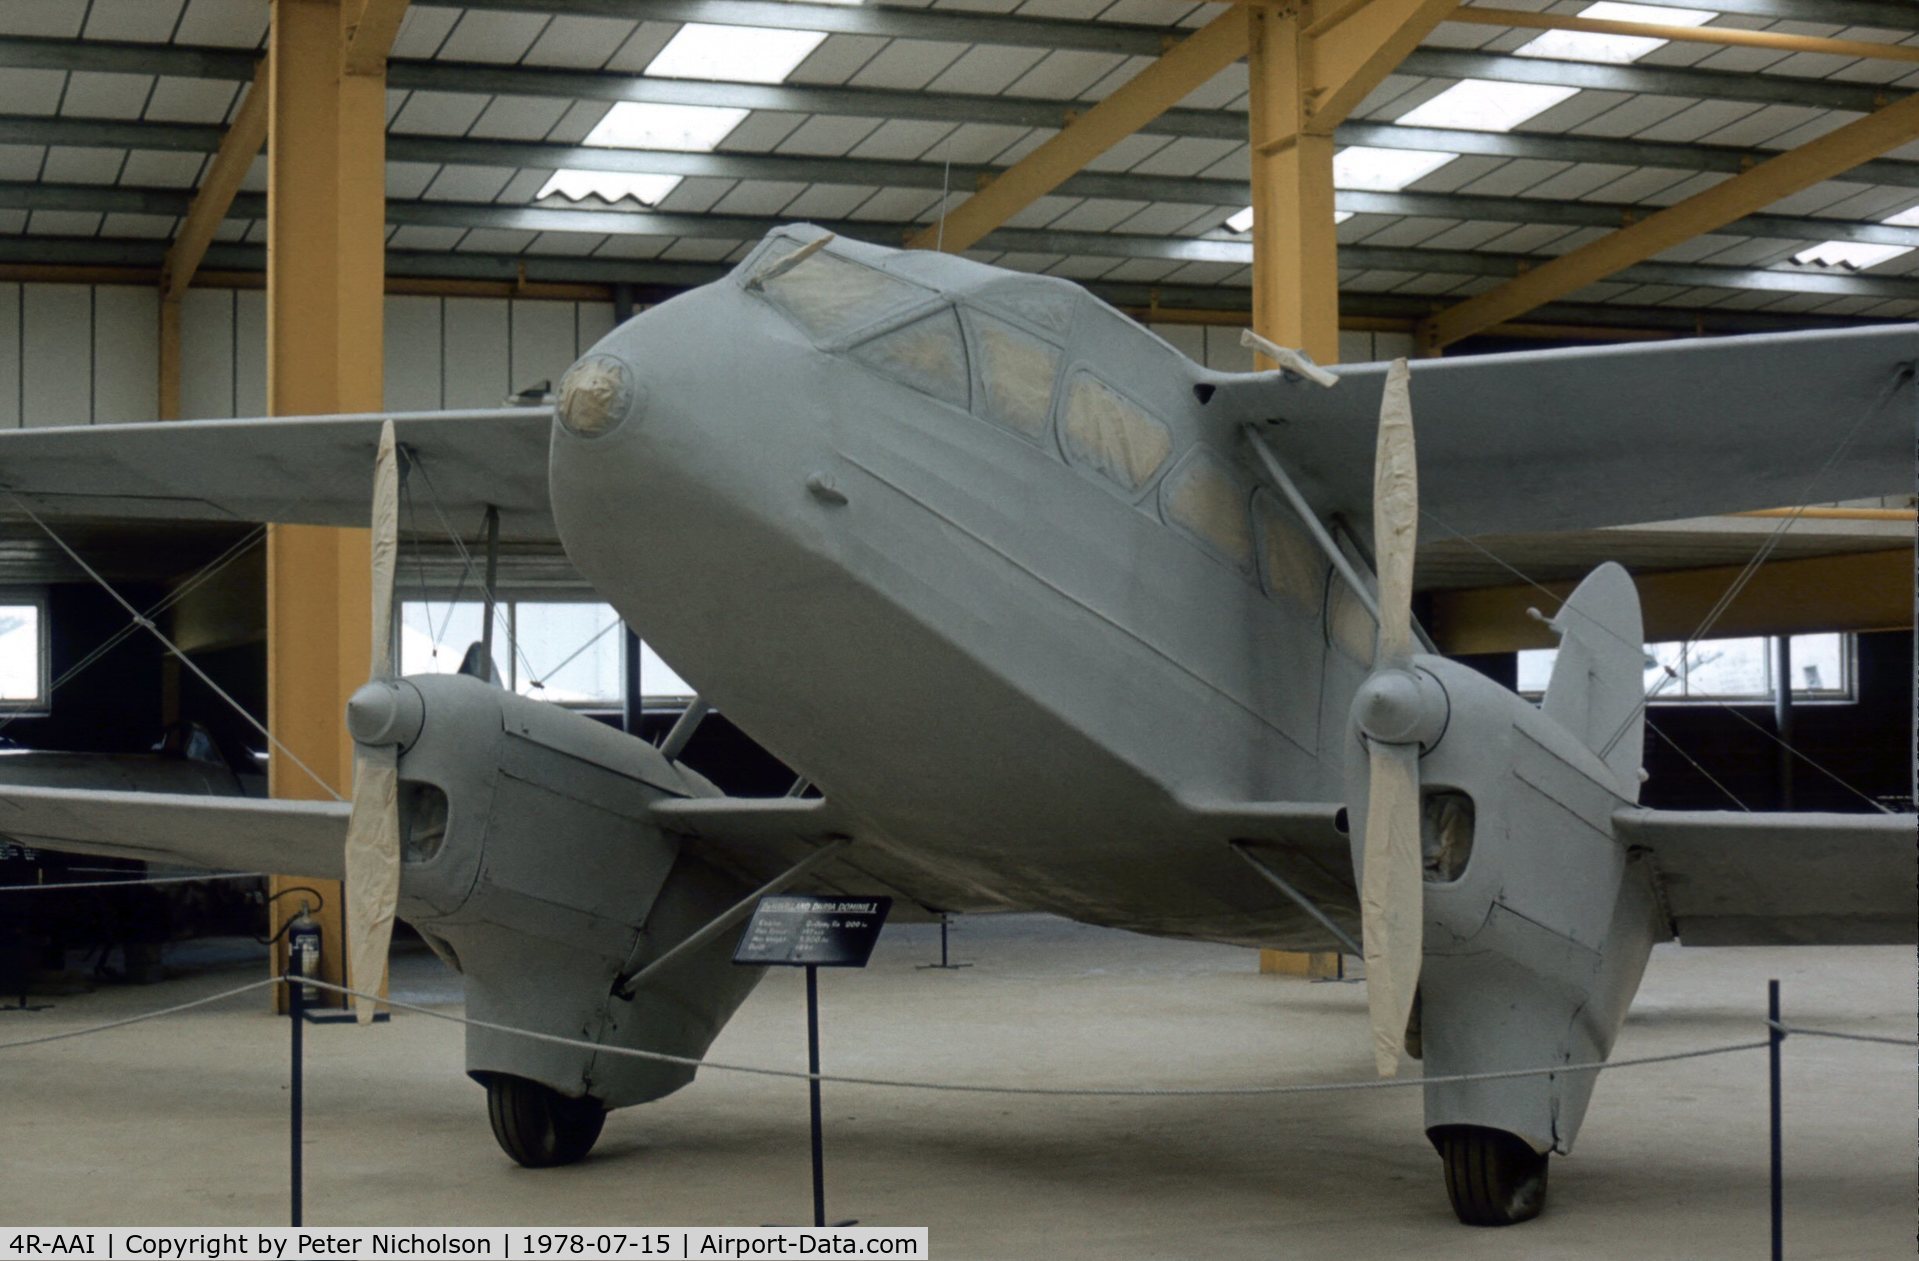 4R-AAI, 1944 De Havilland DH-89A Dominie/Dragon Rapide C/N 6736, Dragon Rapide undergoing restoration at the Strathallan Collection as seen at their 1978 Open Day.